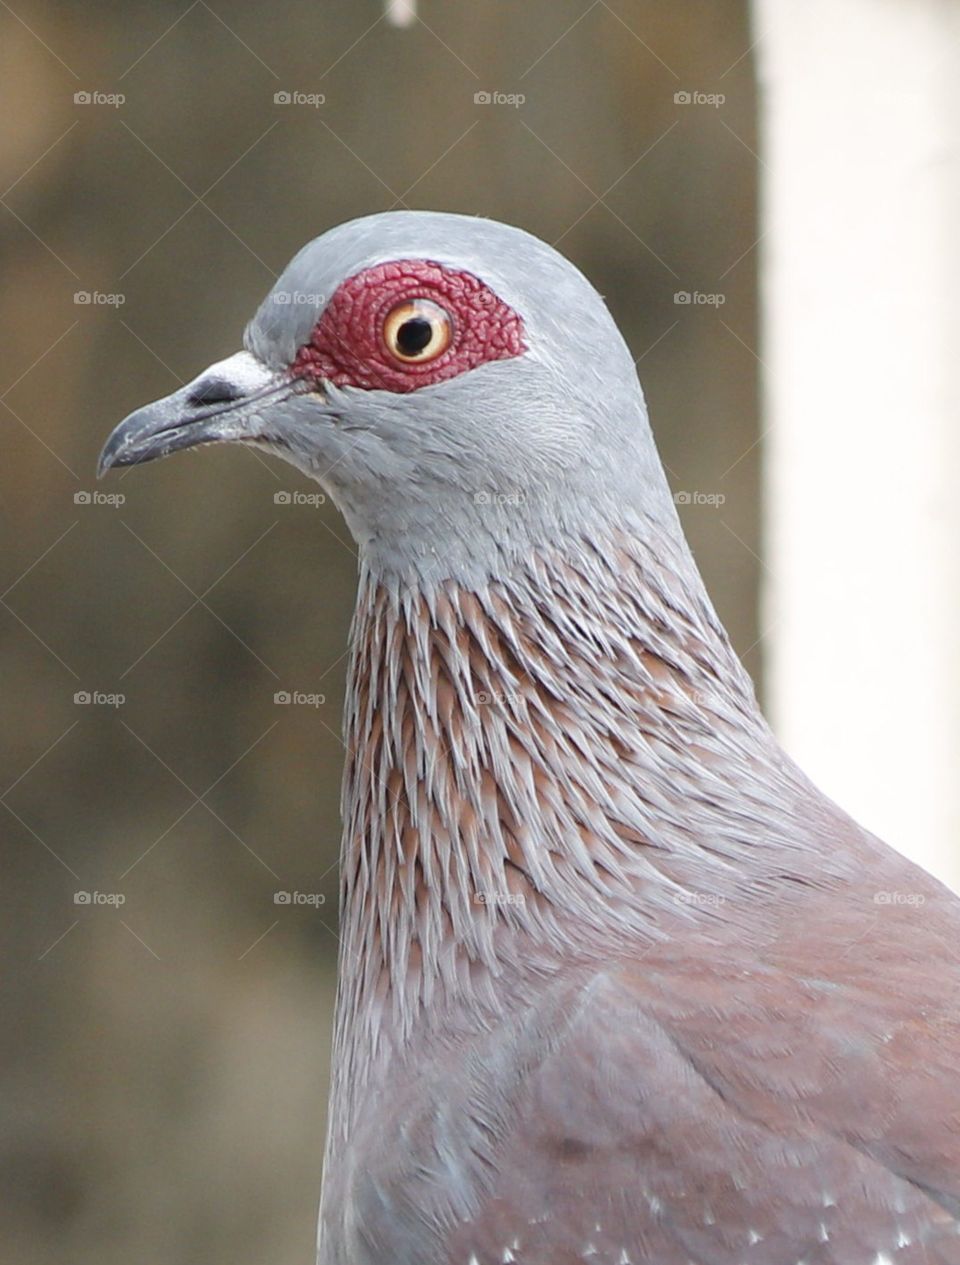 A Rock pigeon keeps a wary eye out for imminent danger before attempting to try some seed.